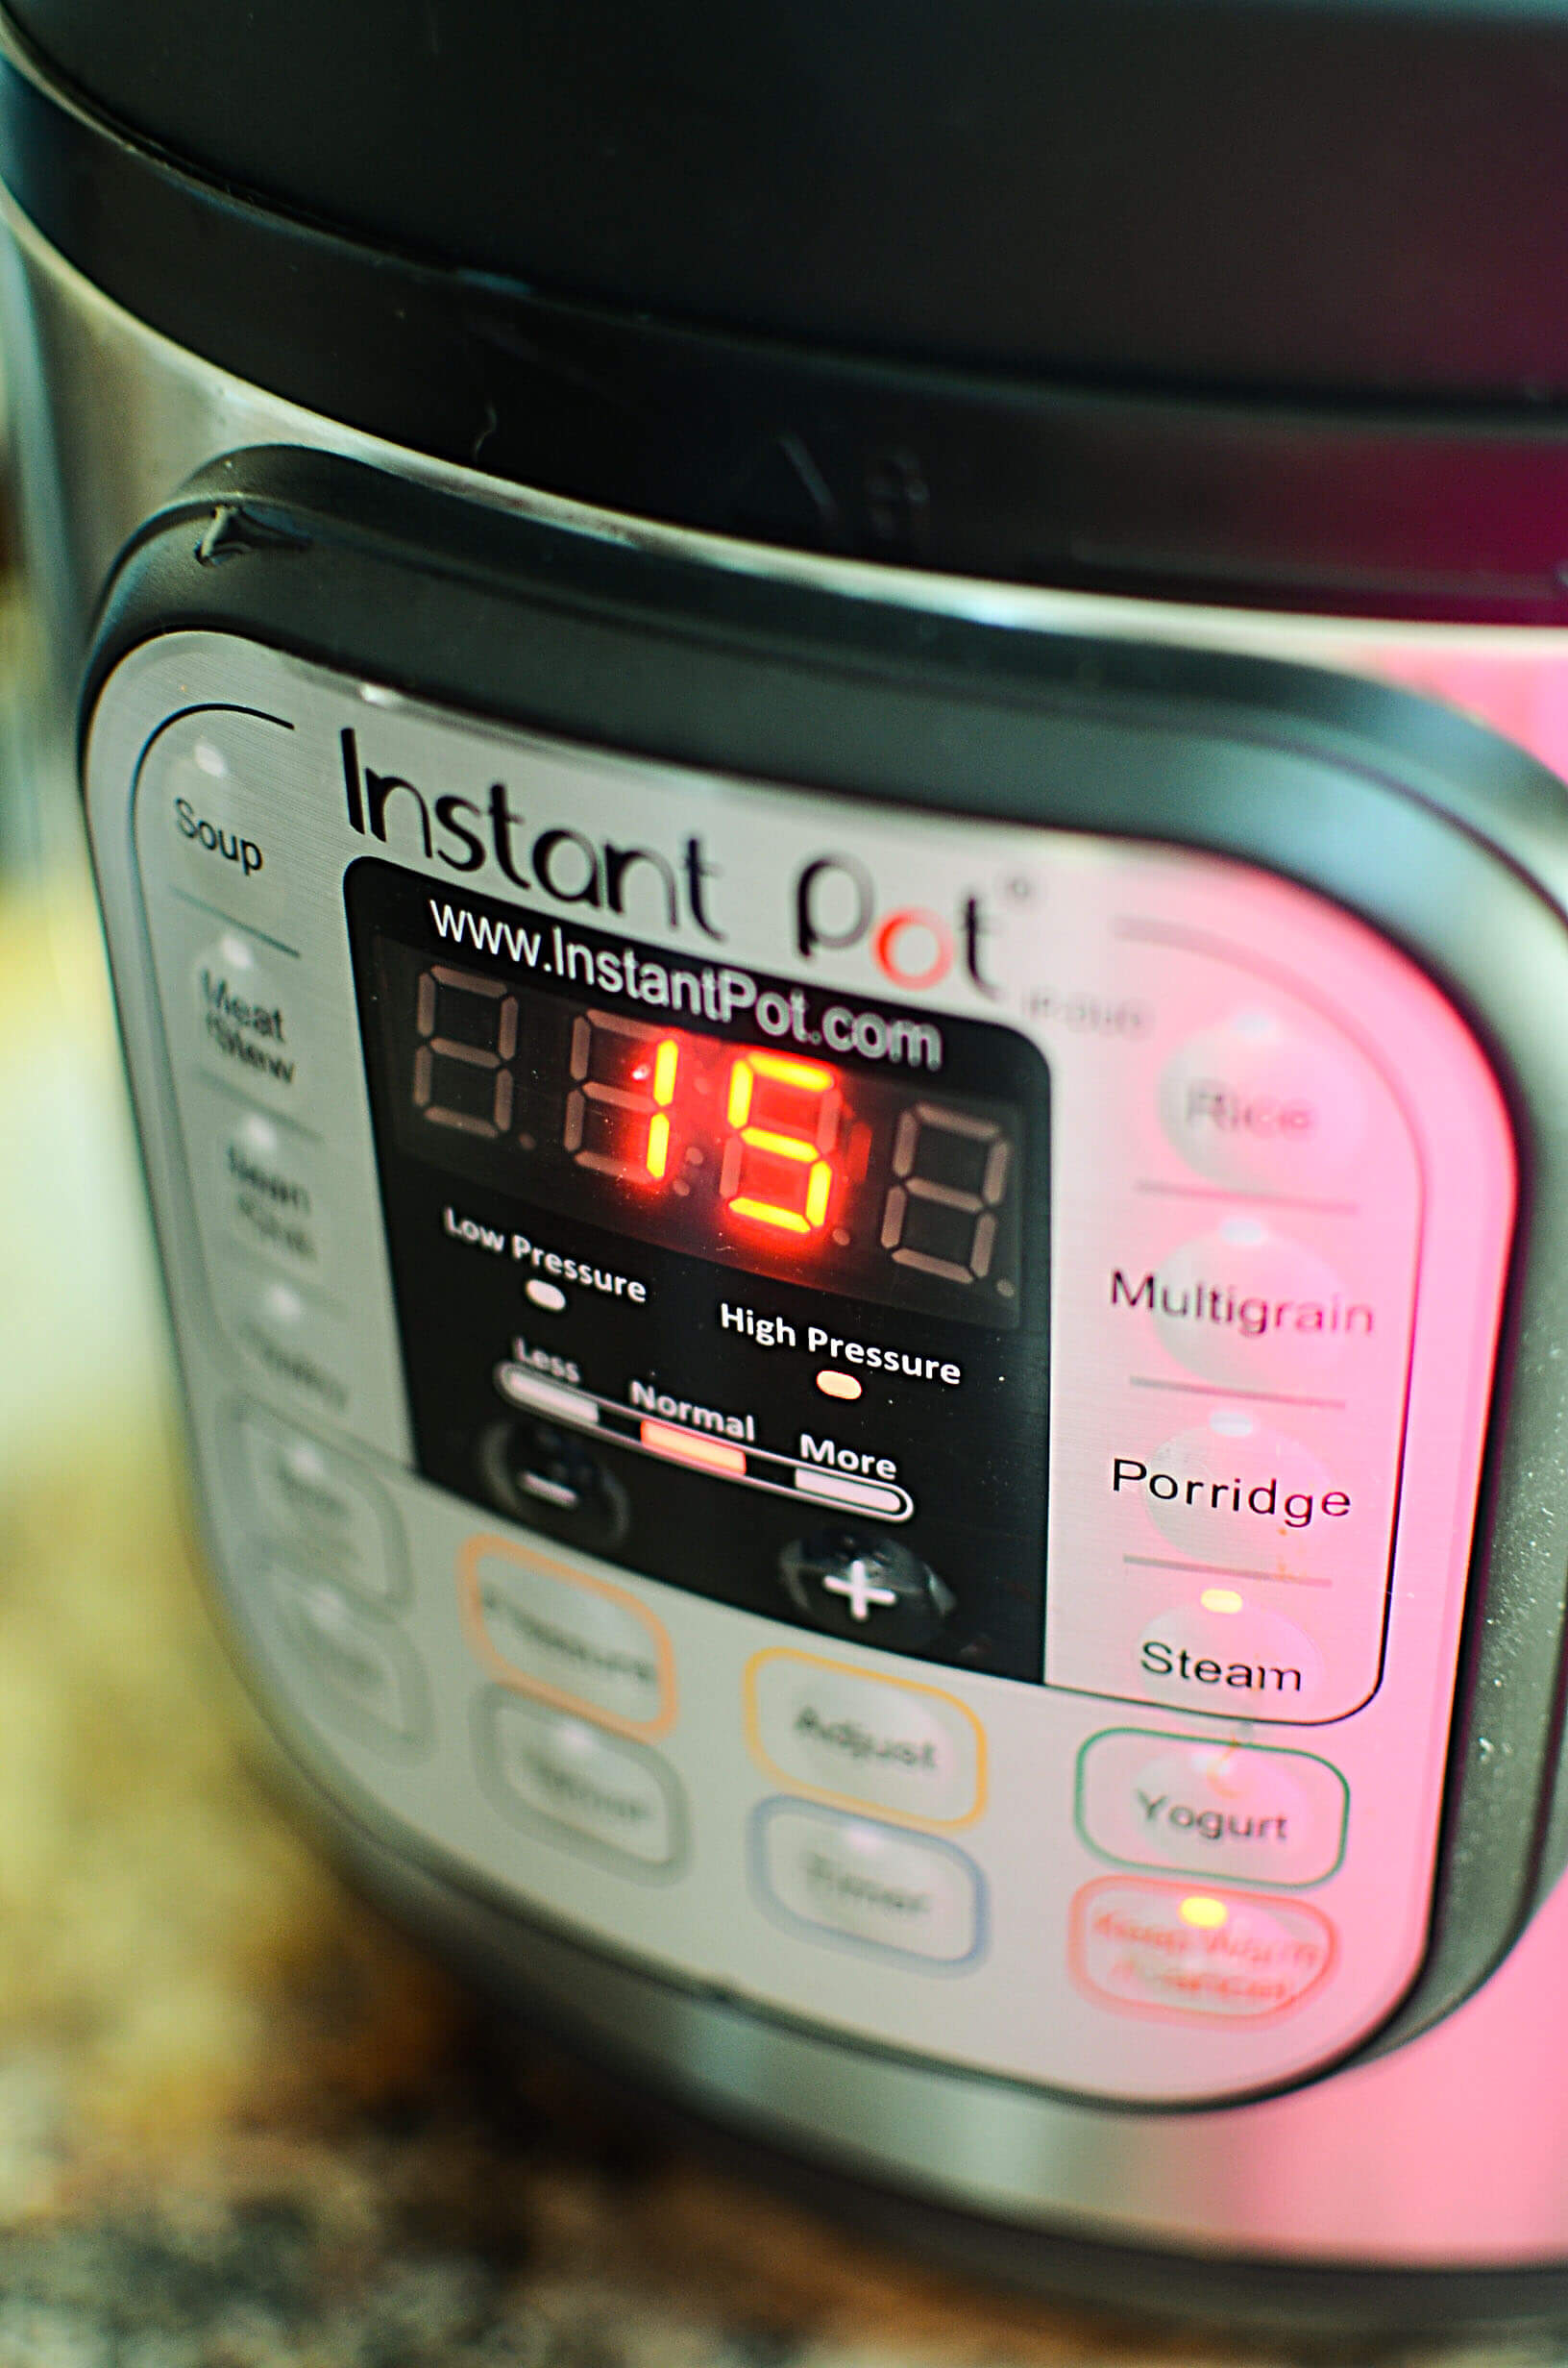 How To Use Instant Pot - Instant Pot Guide For Beginners